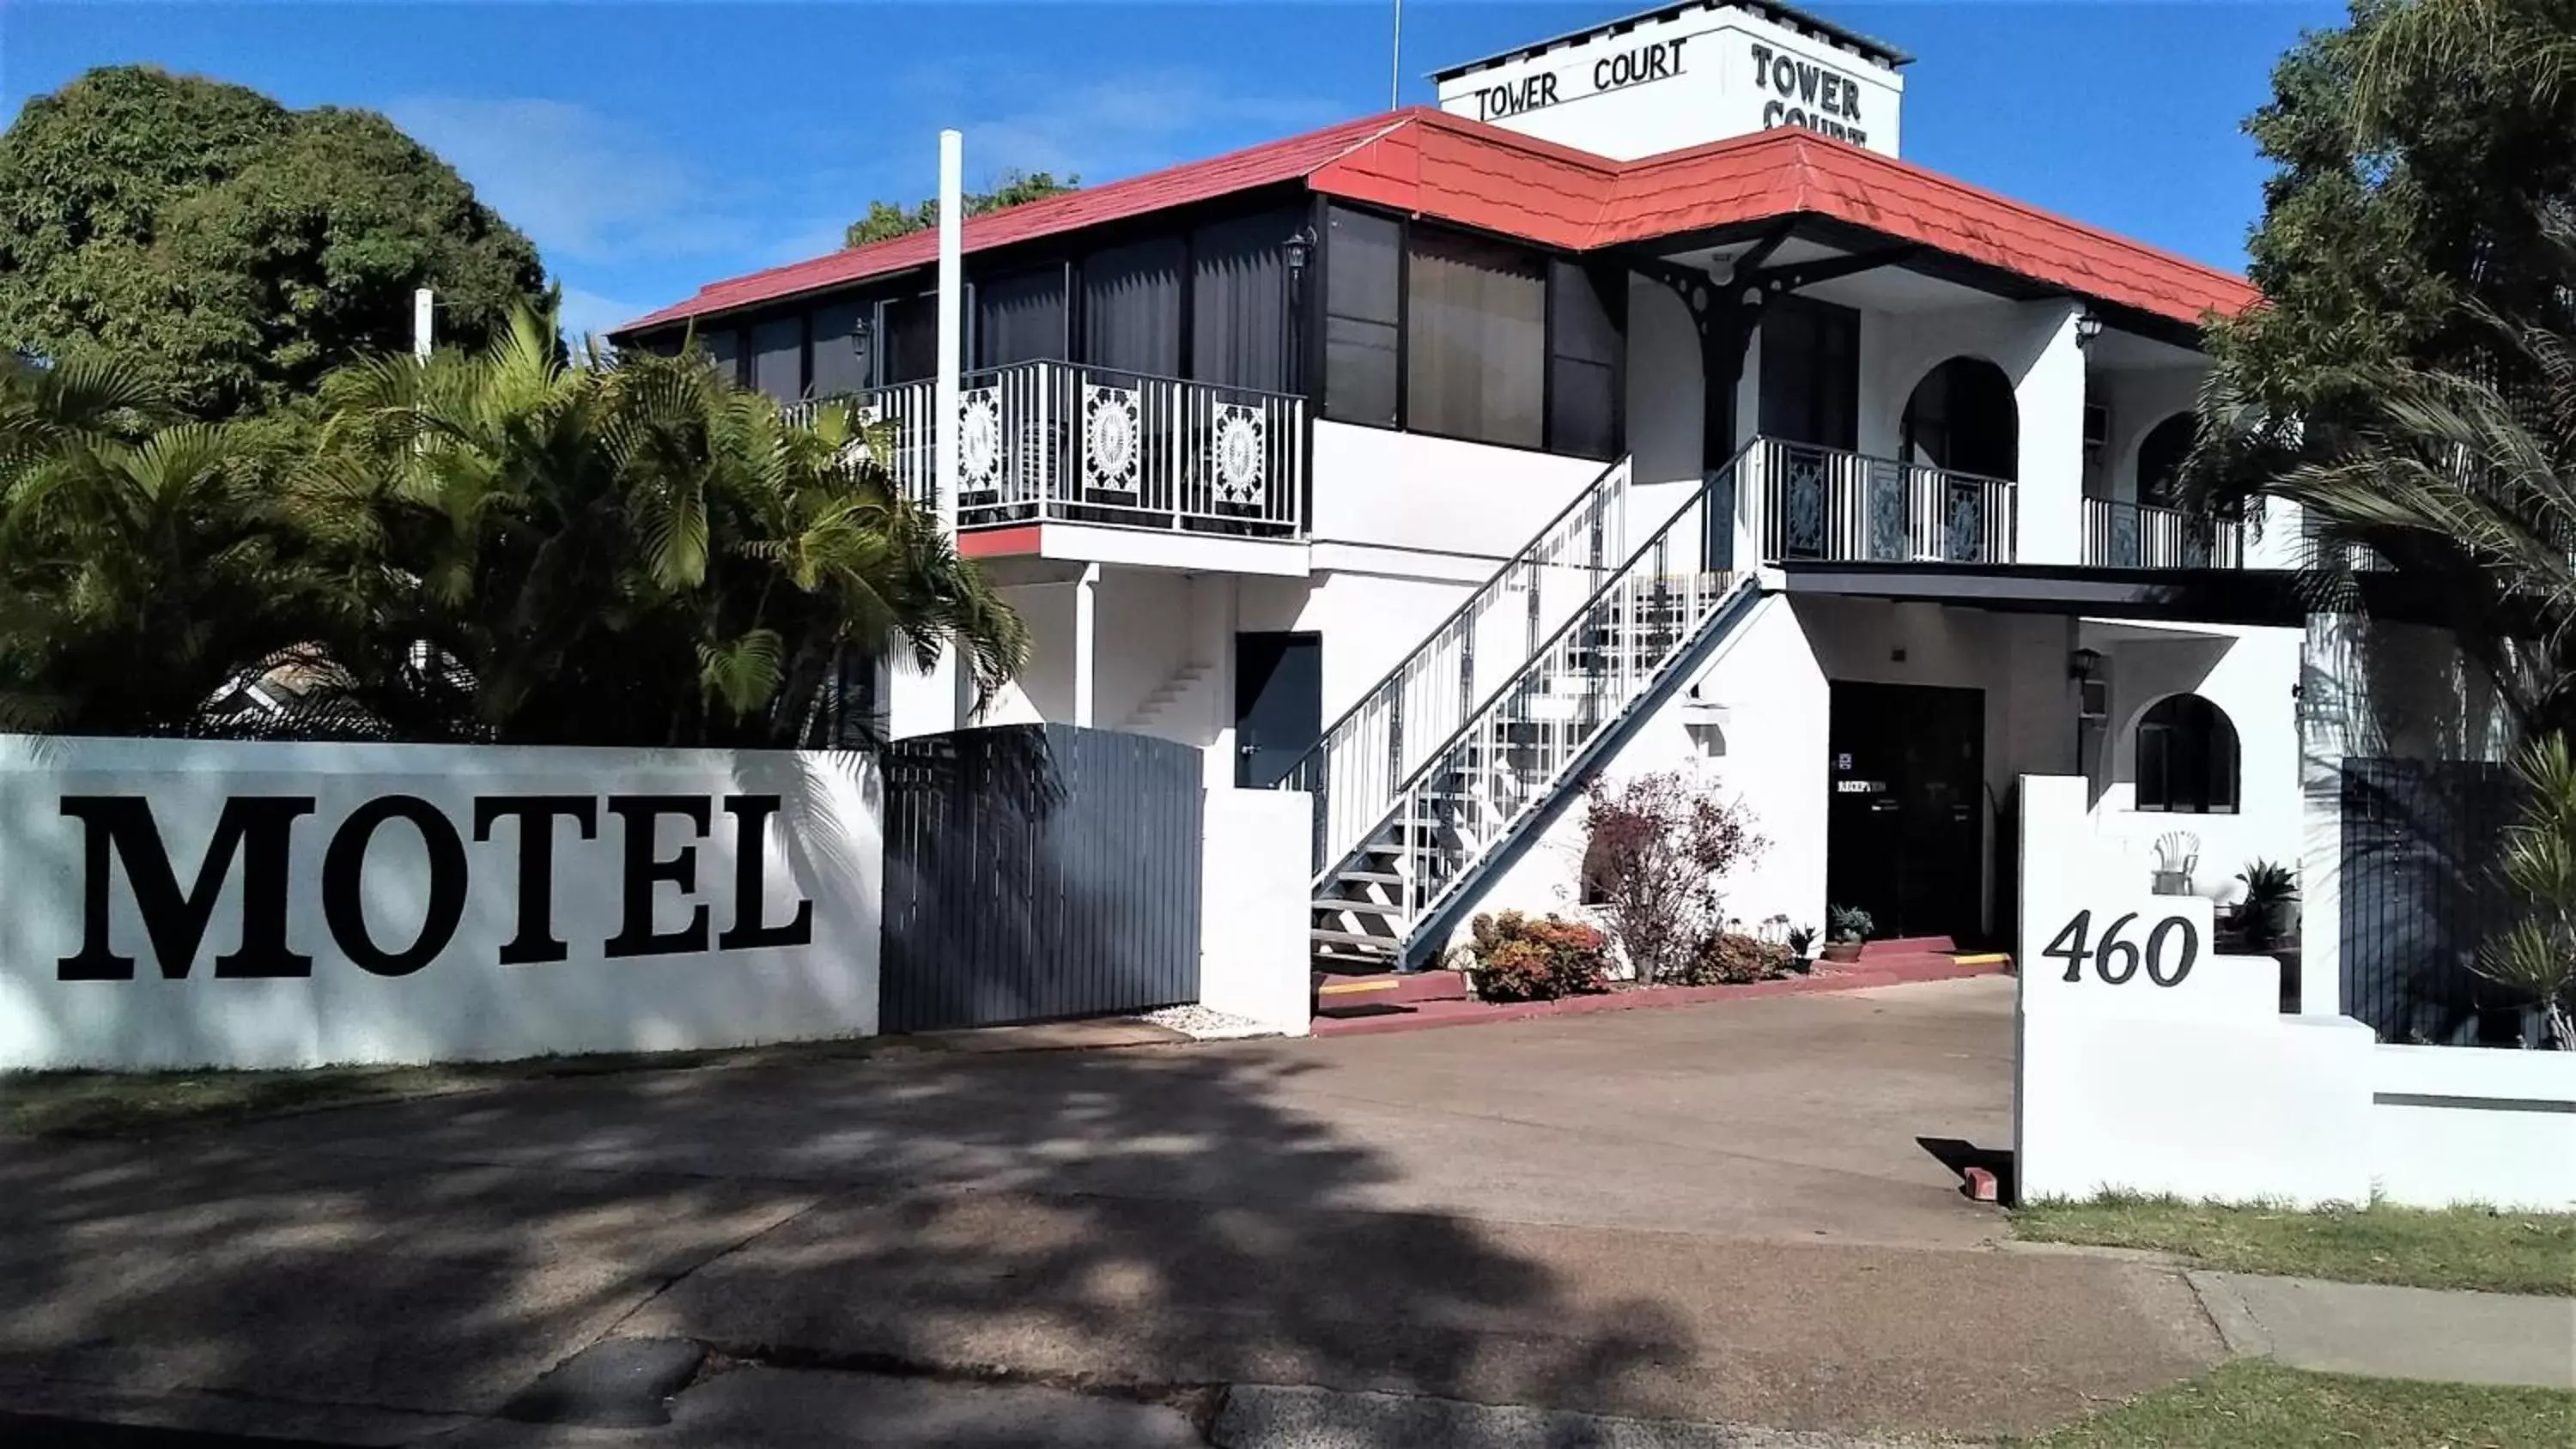 Facade/entrance, Property Building in Tower Court Motel